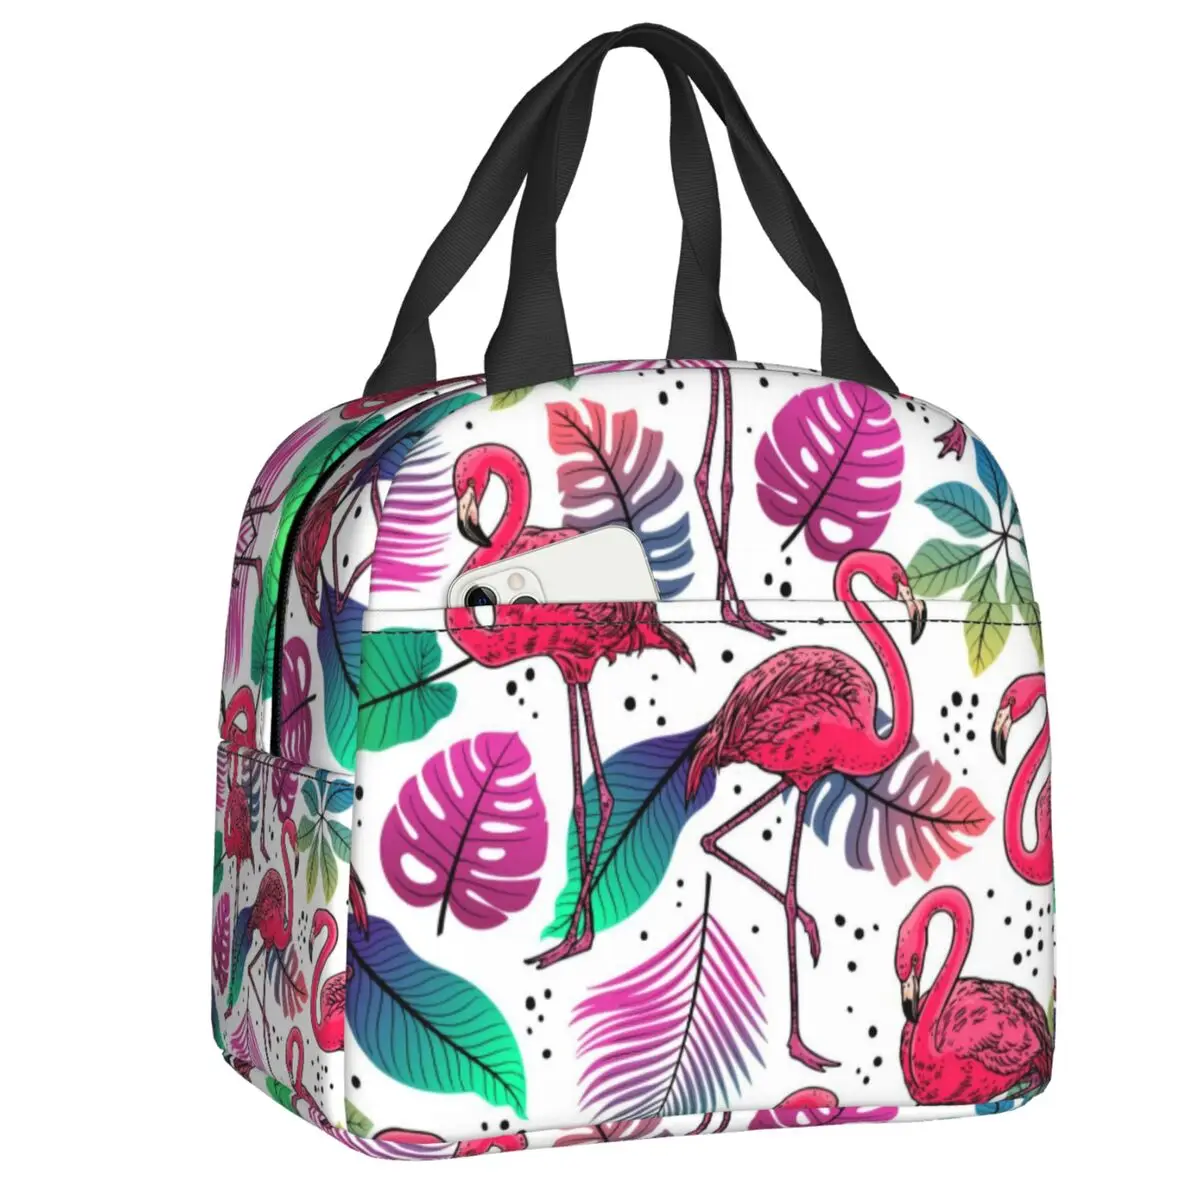 

Flamingos And Palm Leaves Thermal Insulated Lunch Bags Women Tropical Pattern Resuable Lunch Tote for Outdoor Picnic Food Box